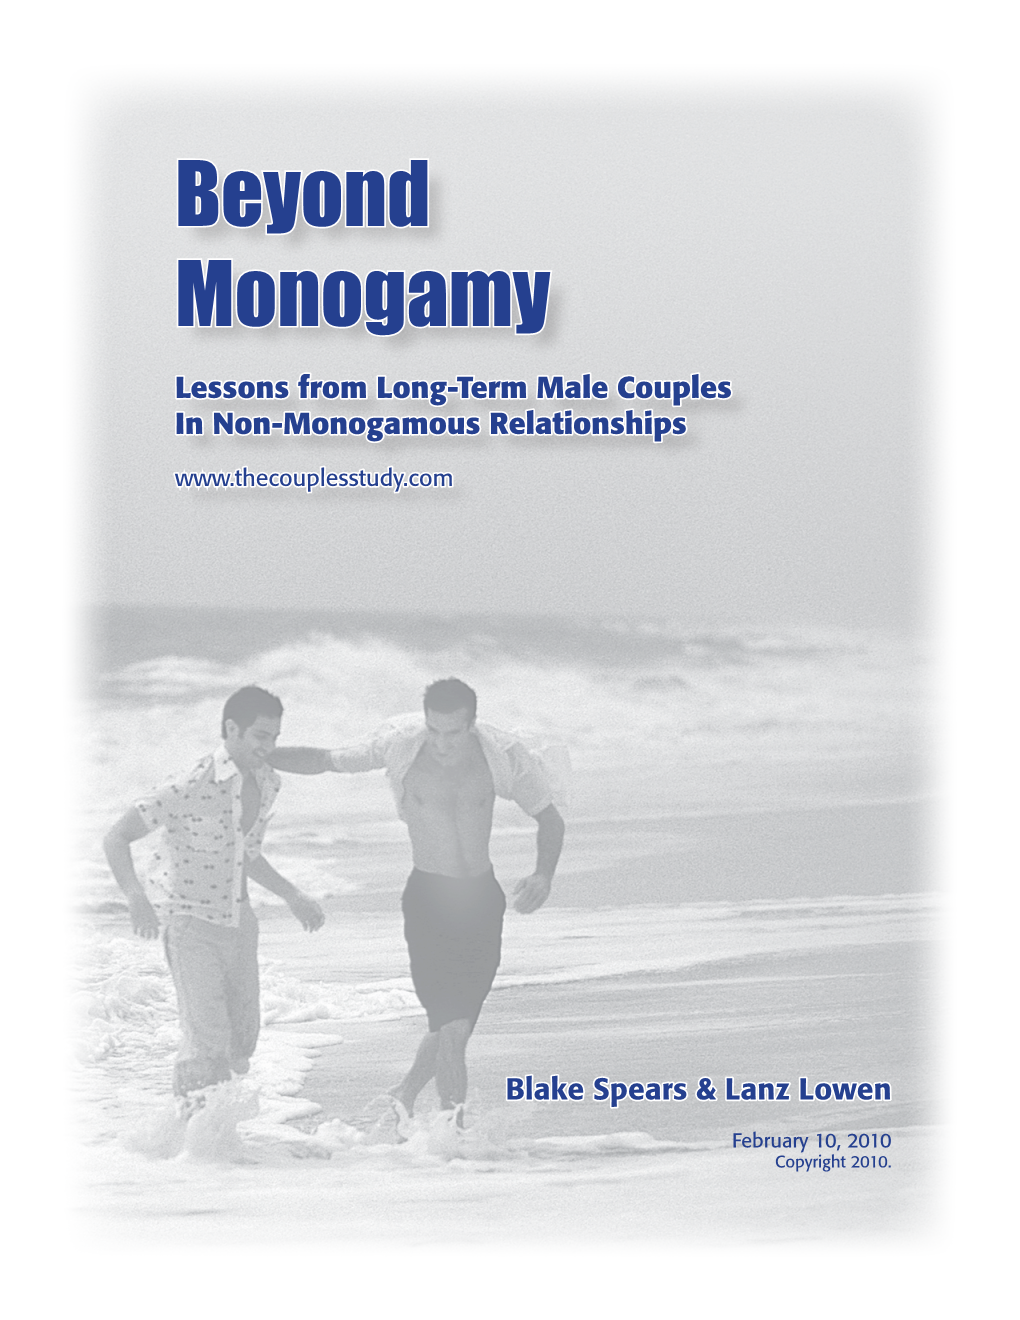 Beyond Monogamy Lessons from Long-Term Male Couples in Non-Monogamous Relationships